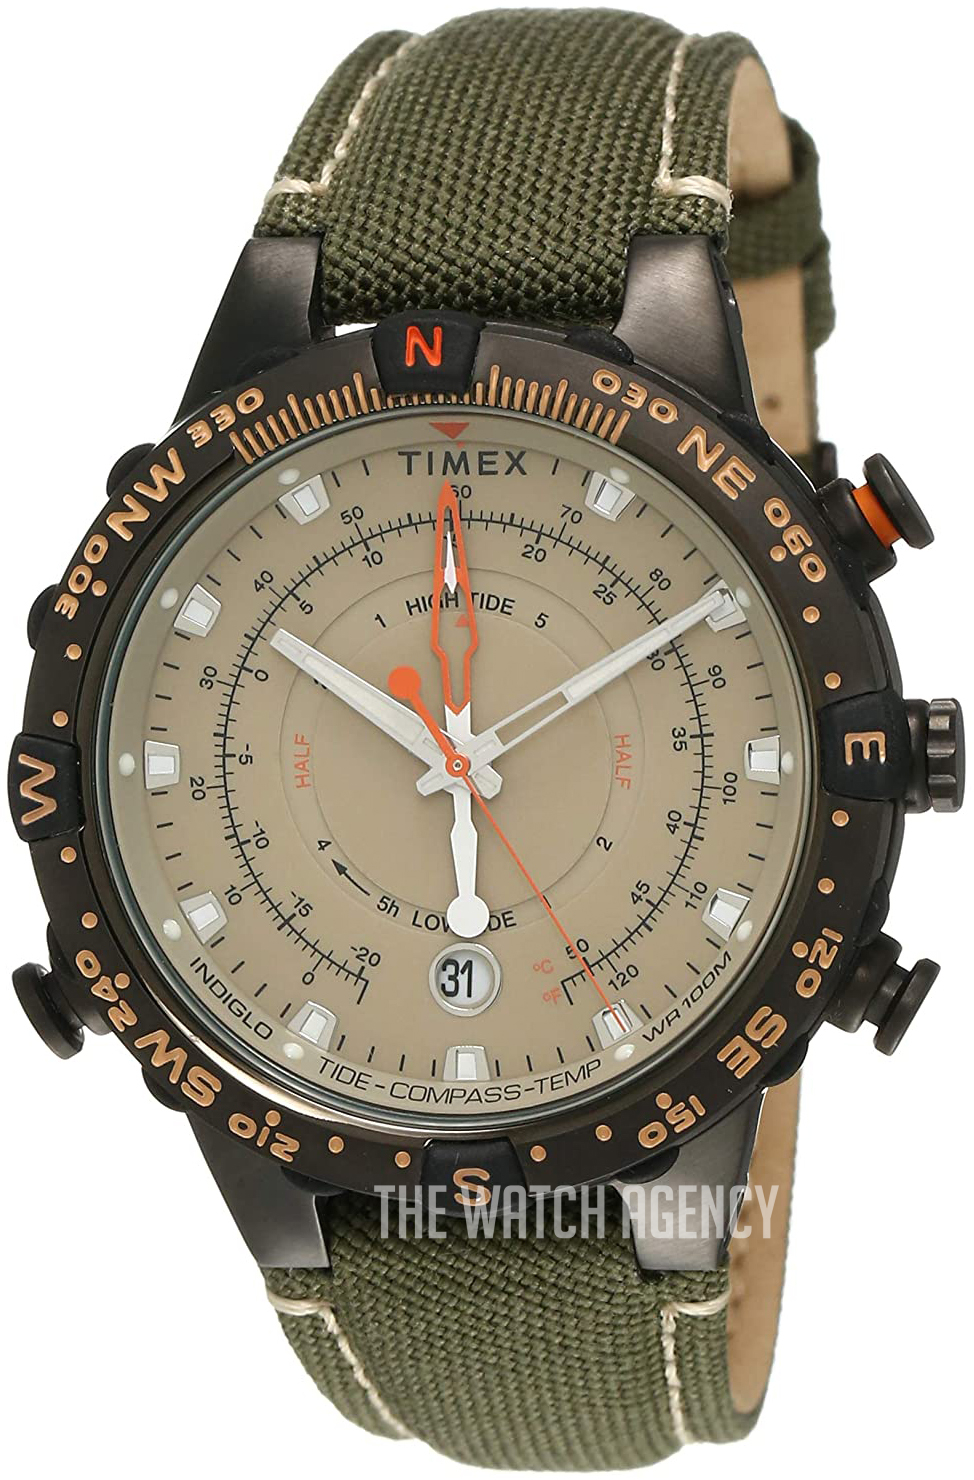 The Timex Allied Chrono Is a Stylish and Inexpensive Military Style Watch